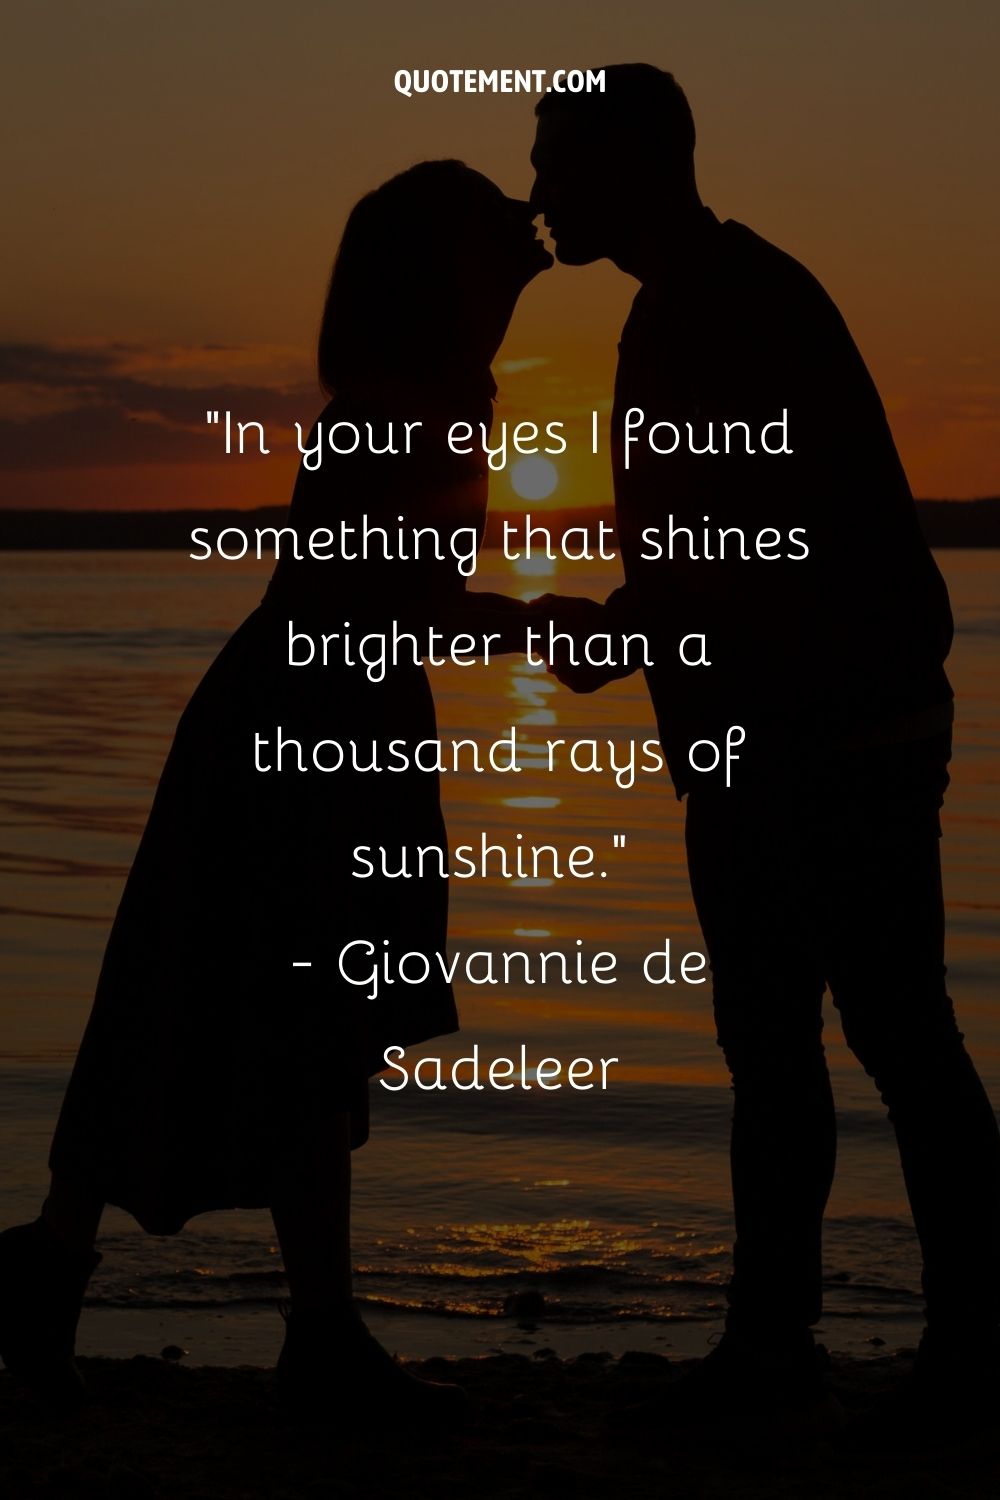 In your eyes I found something that shines brighter than a thousand rays of sunshine.